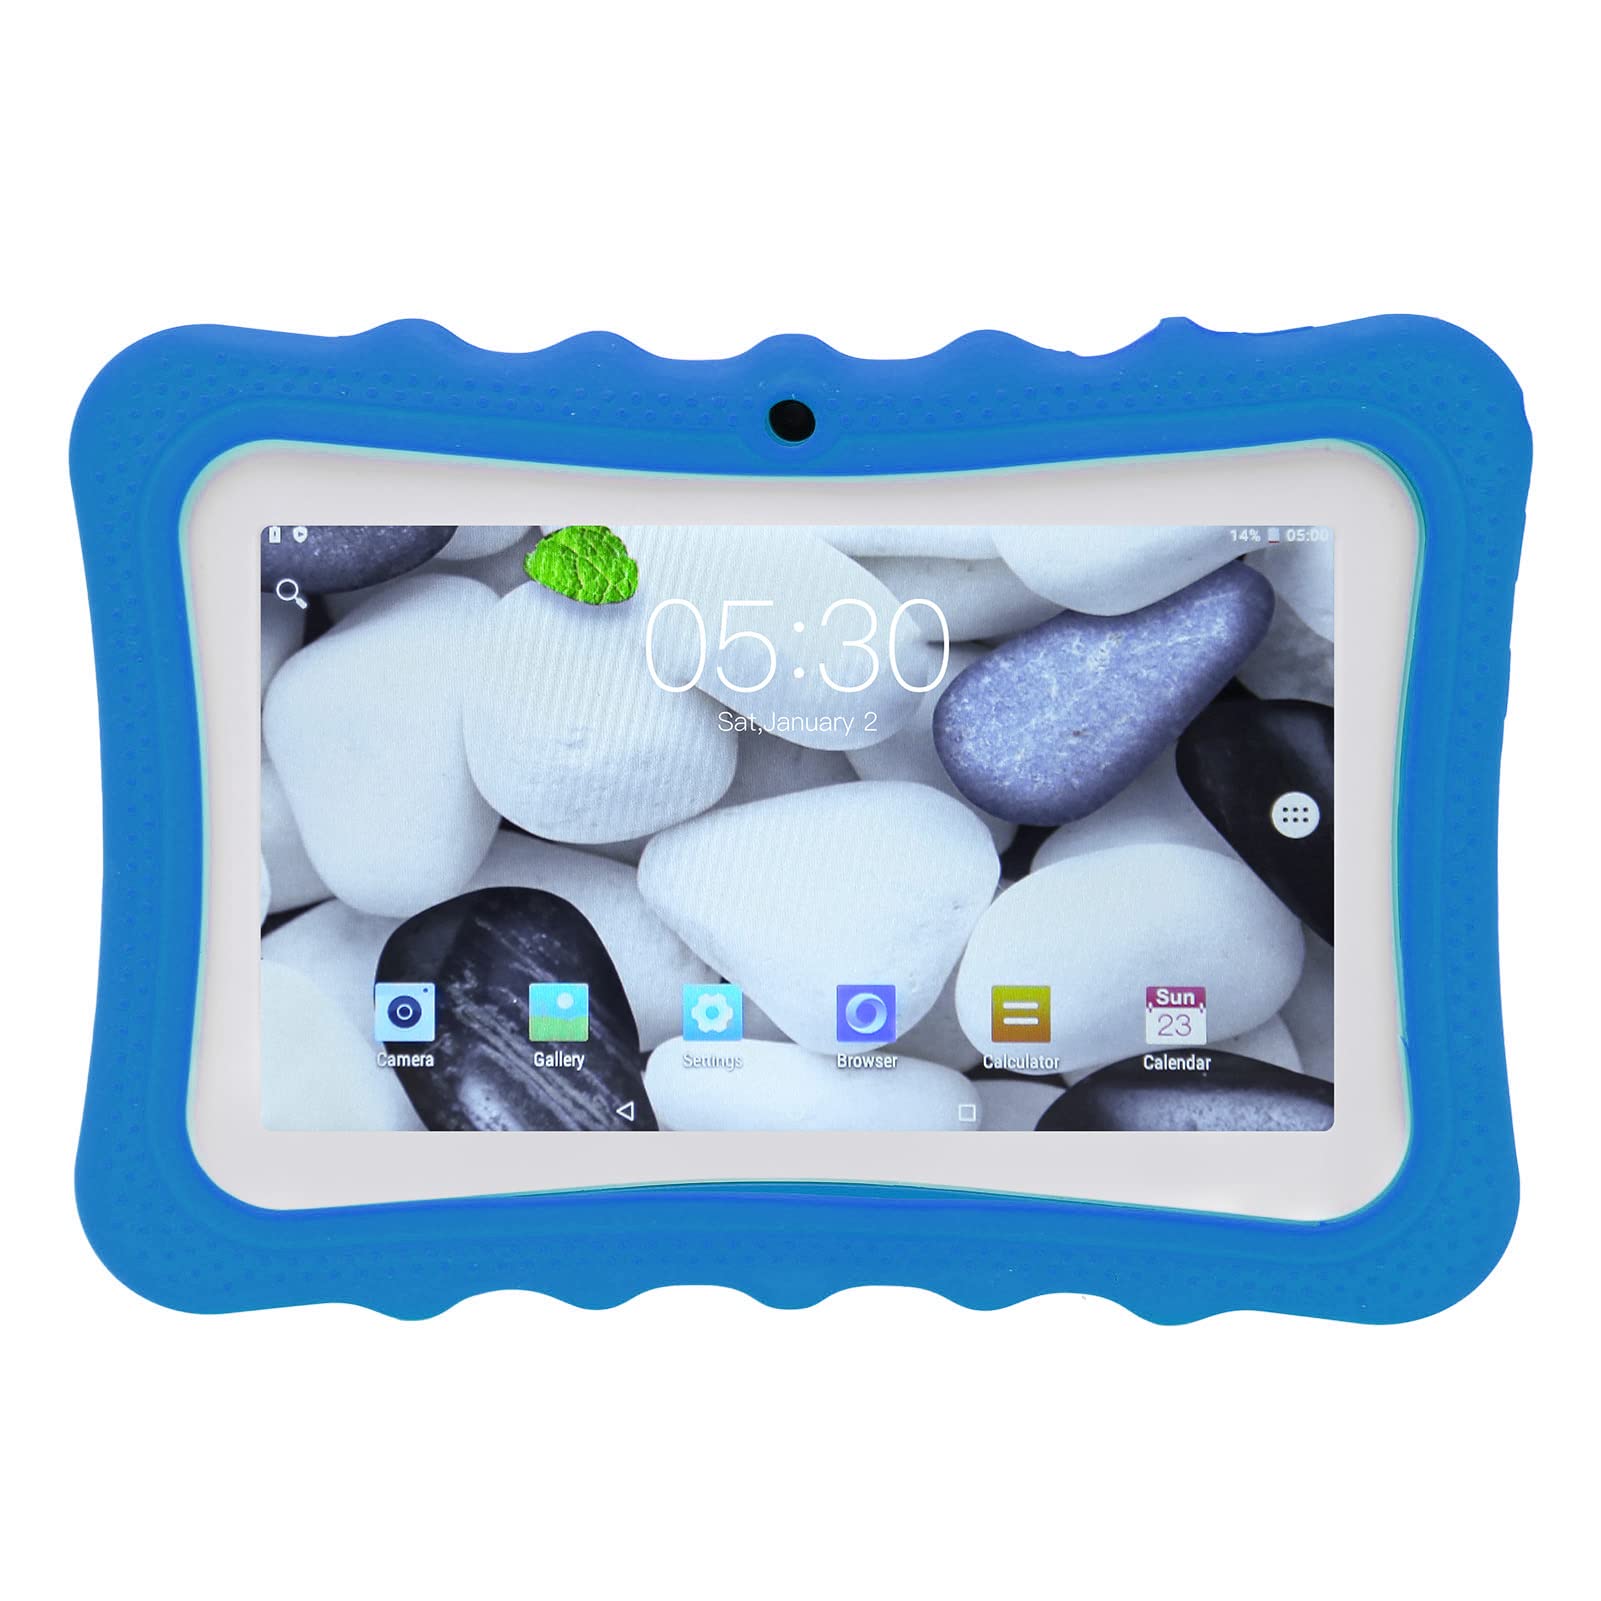 Kids Tablet 7 Inch Android8.0, 4GB RAM 32GB ROM Storage, 5G WiFi, Bluetooth5.0, Dual Camera, Educational, 5500 mAh, 7 Inch 1960x1080 IPS HD Display, with Shockproof Case (Blue)